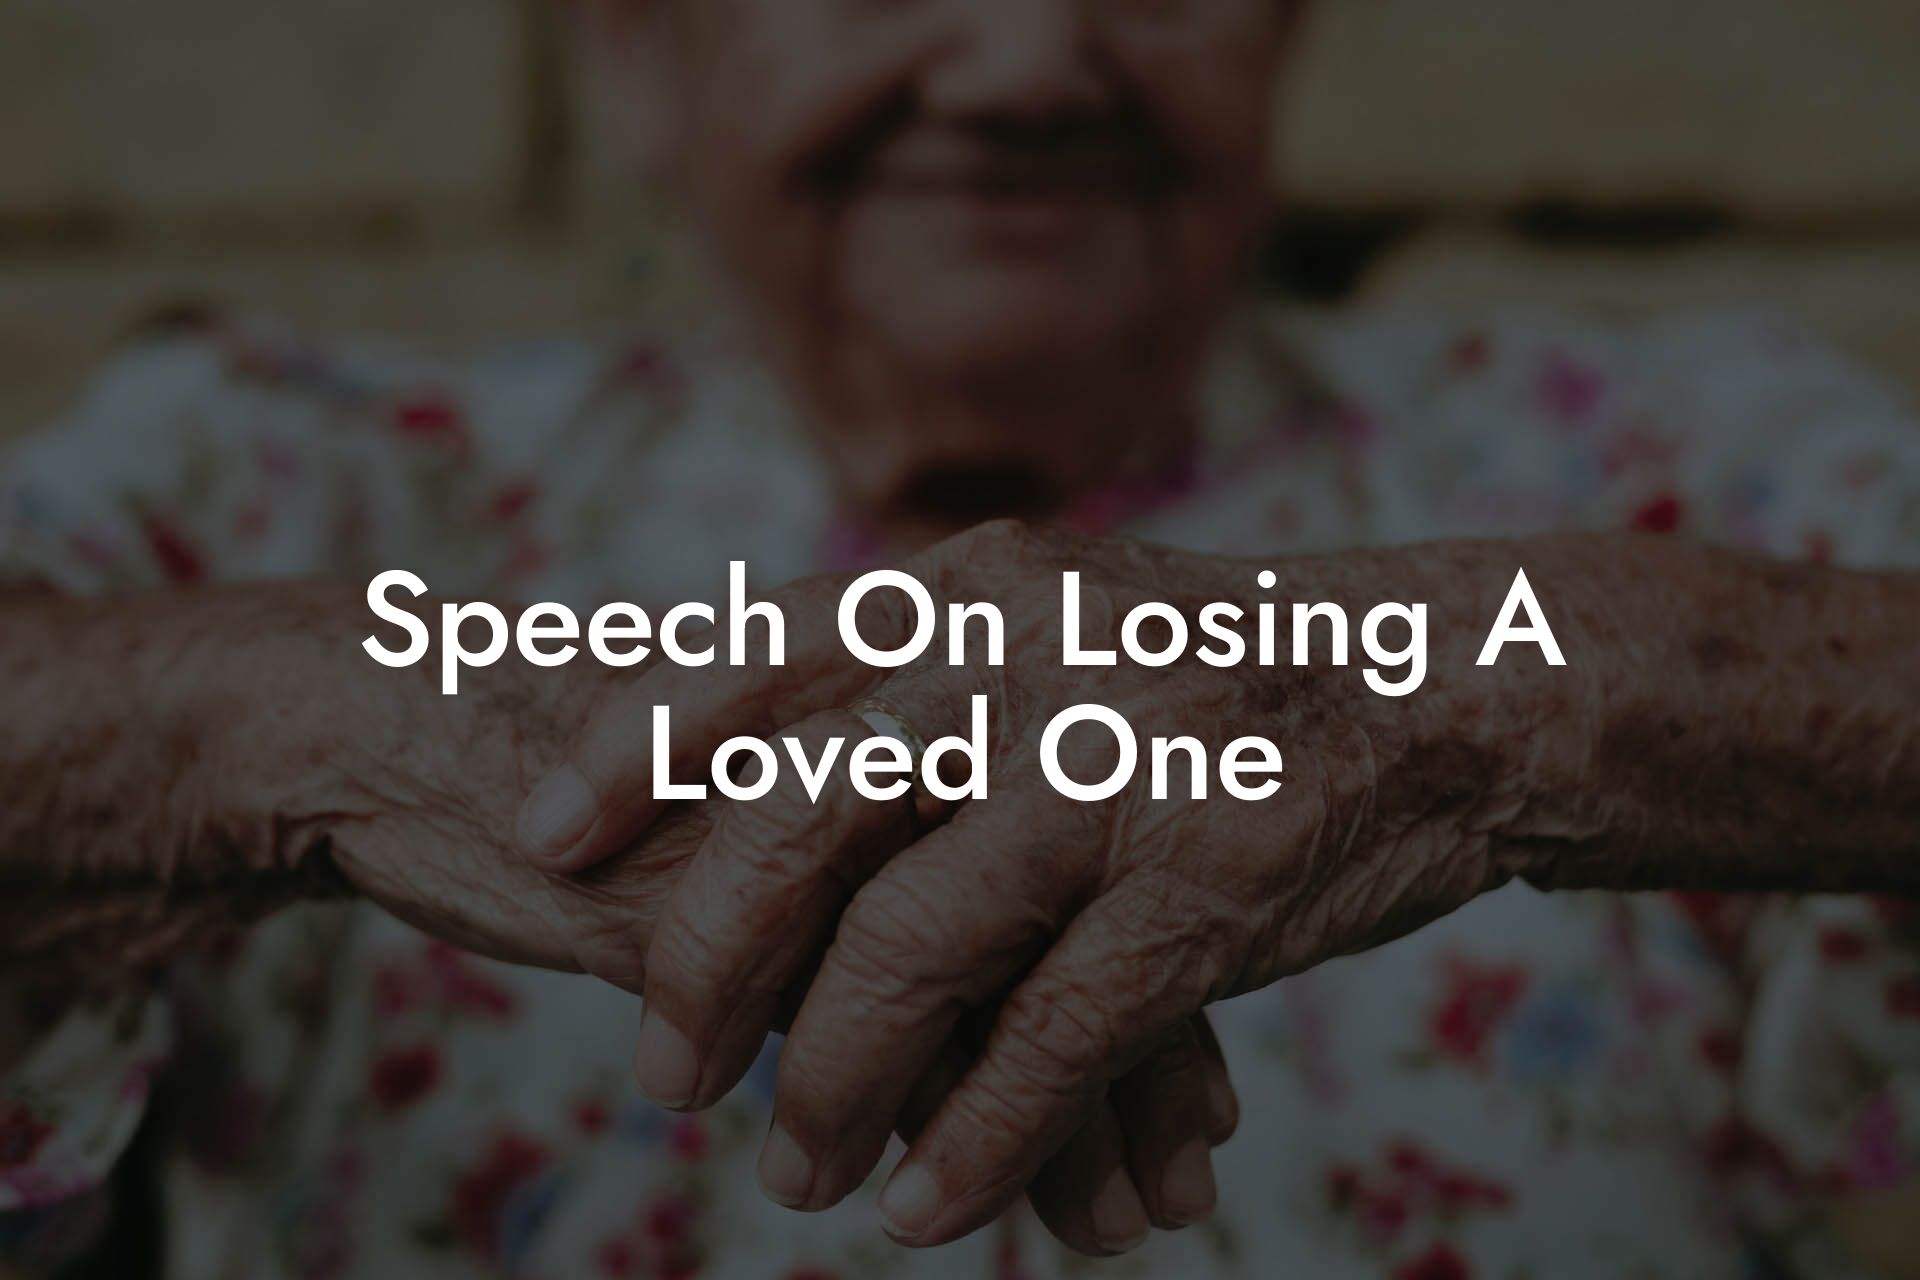 Speech On Losing A Loved One